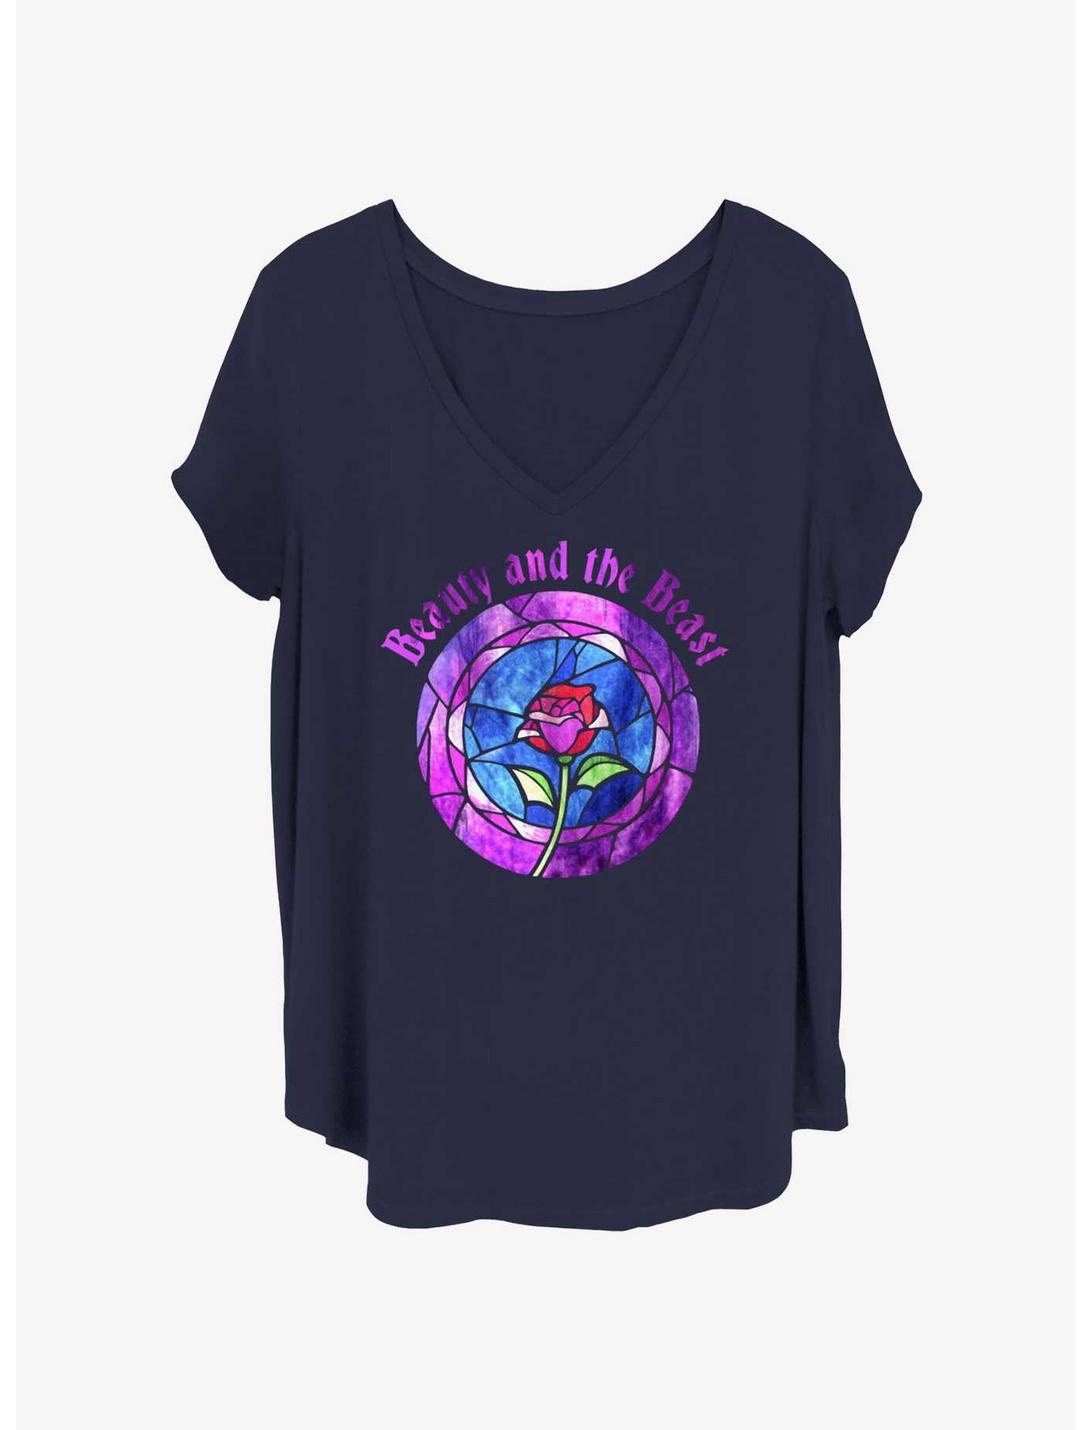 Disney Beauty and the Beast Stained Glass Rose Badge Girls T-Shirt Plus Size, NAVY, hi-res